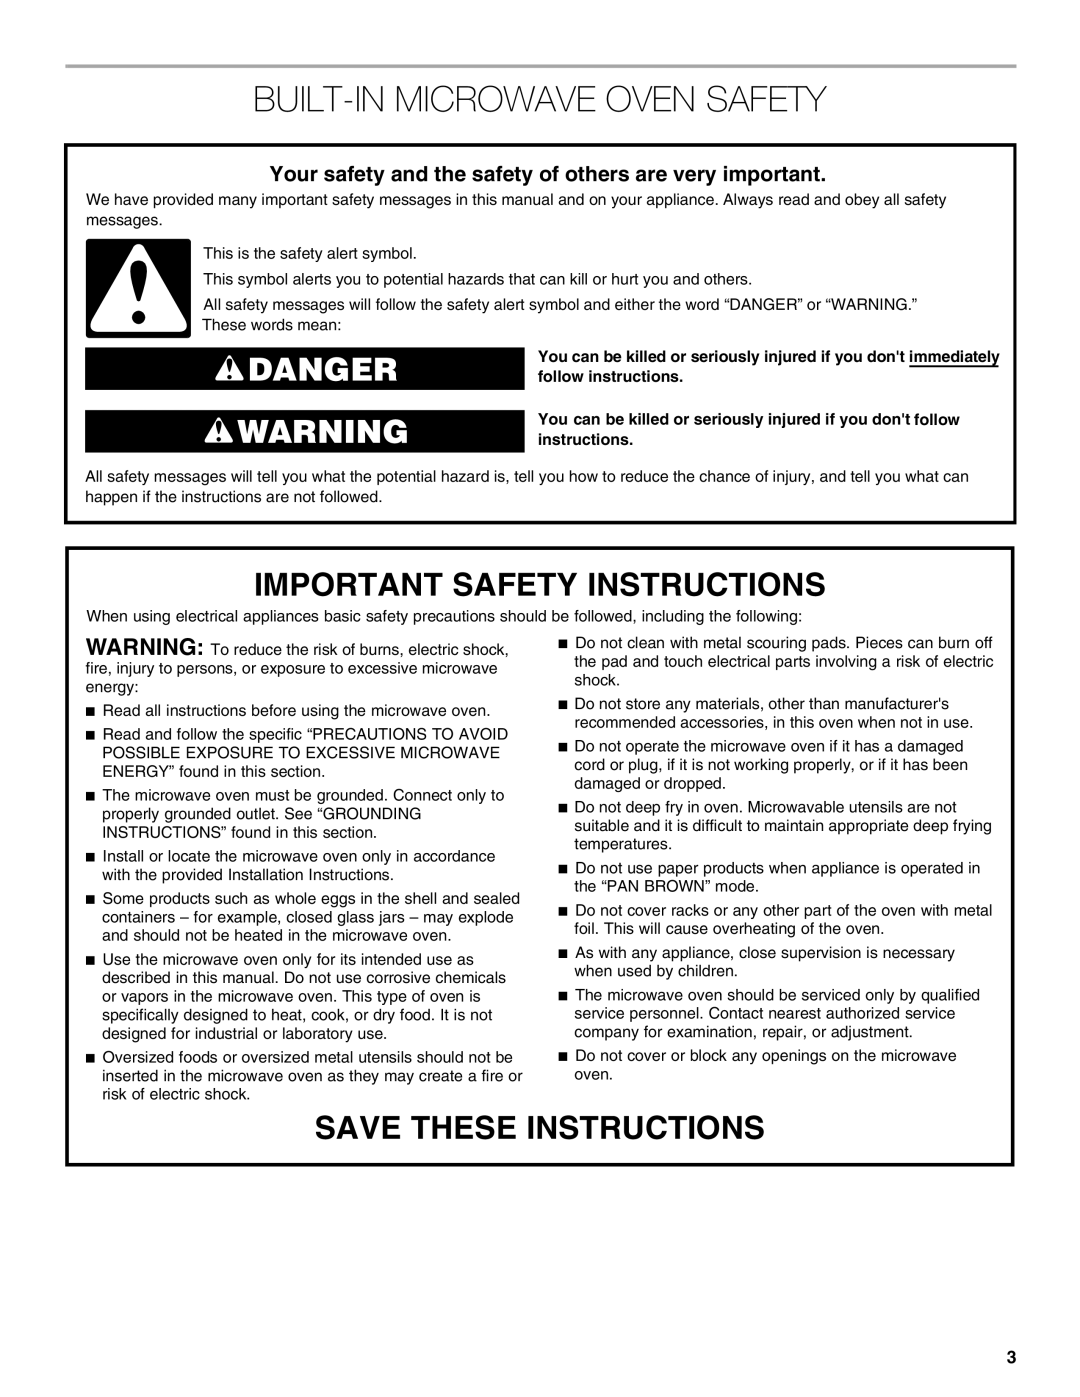 Jenn-Air JMW3430 manual Built-In Microwave Oven Safety, Danger, Important Safety Instructions, Save These Instructions 